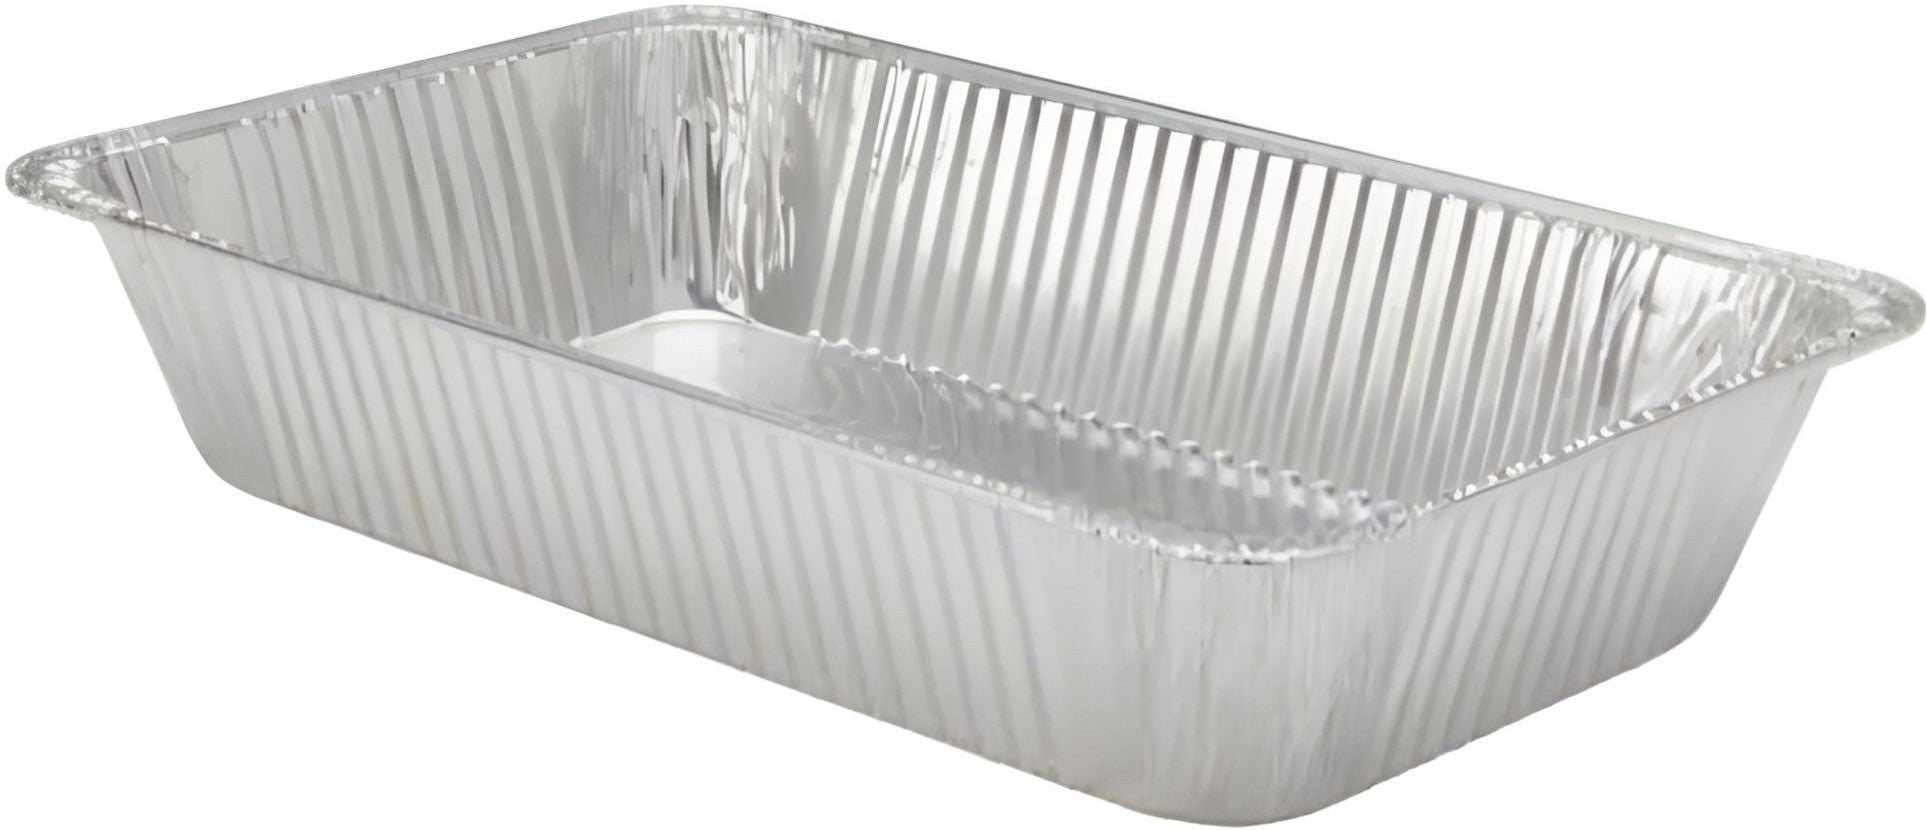 HFA - Full Extra Deep Steam Foil Pan/Containers, 50/Cs - 82020